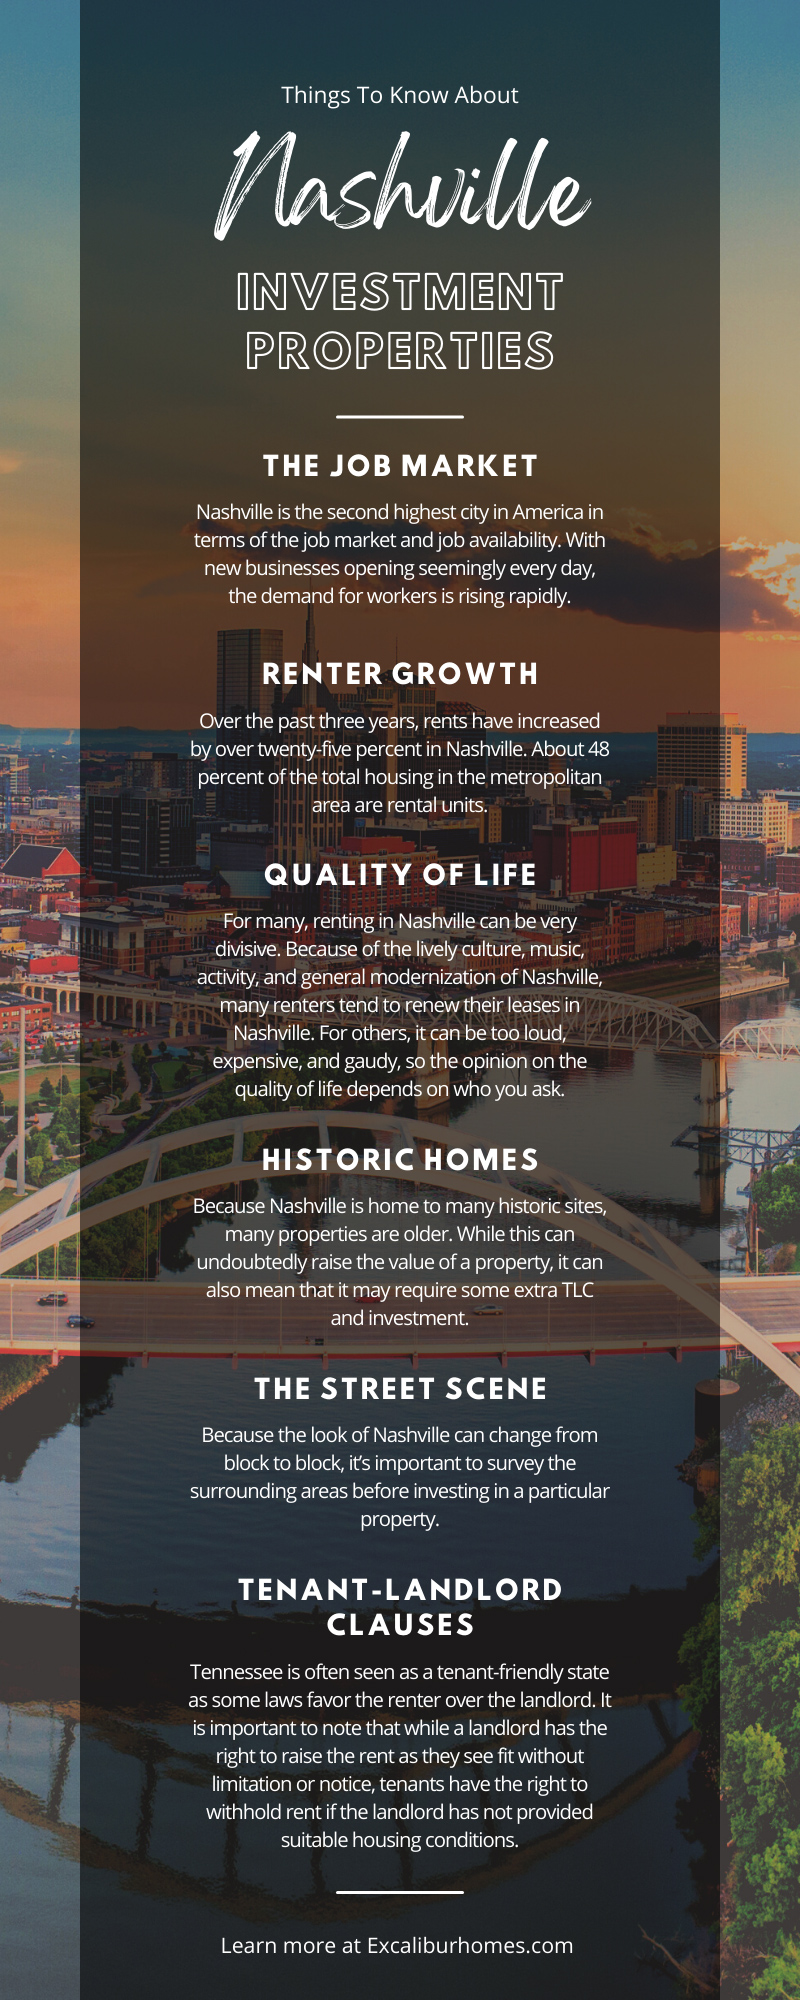 10 Things To Know About Nashville Investment Properties